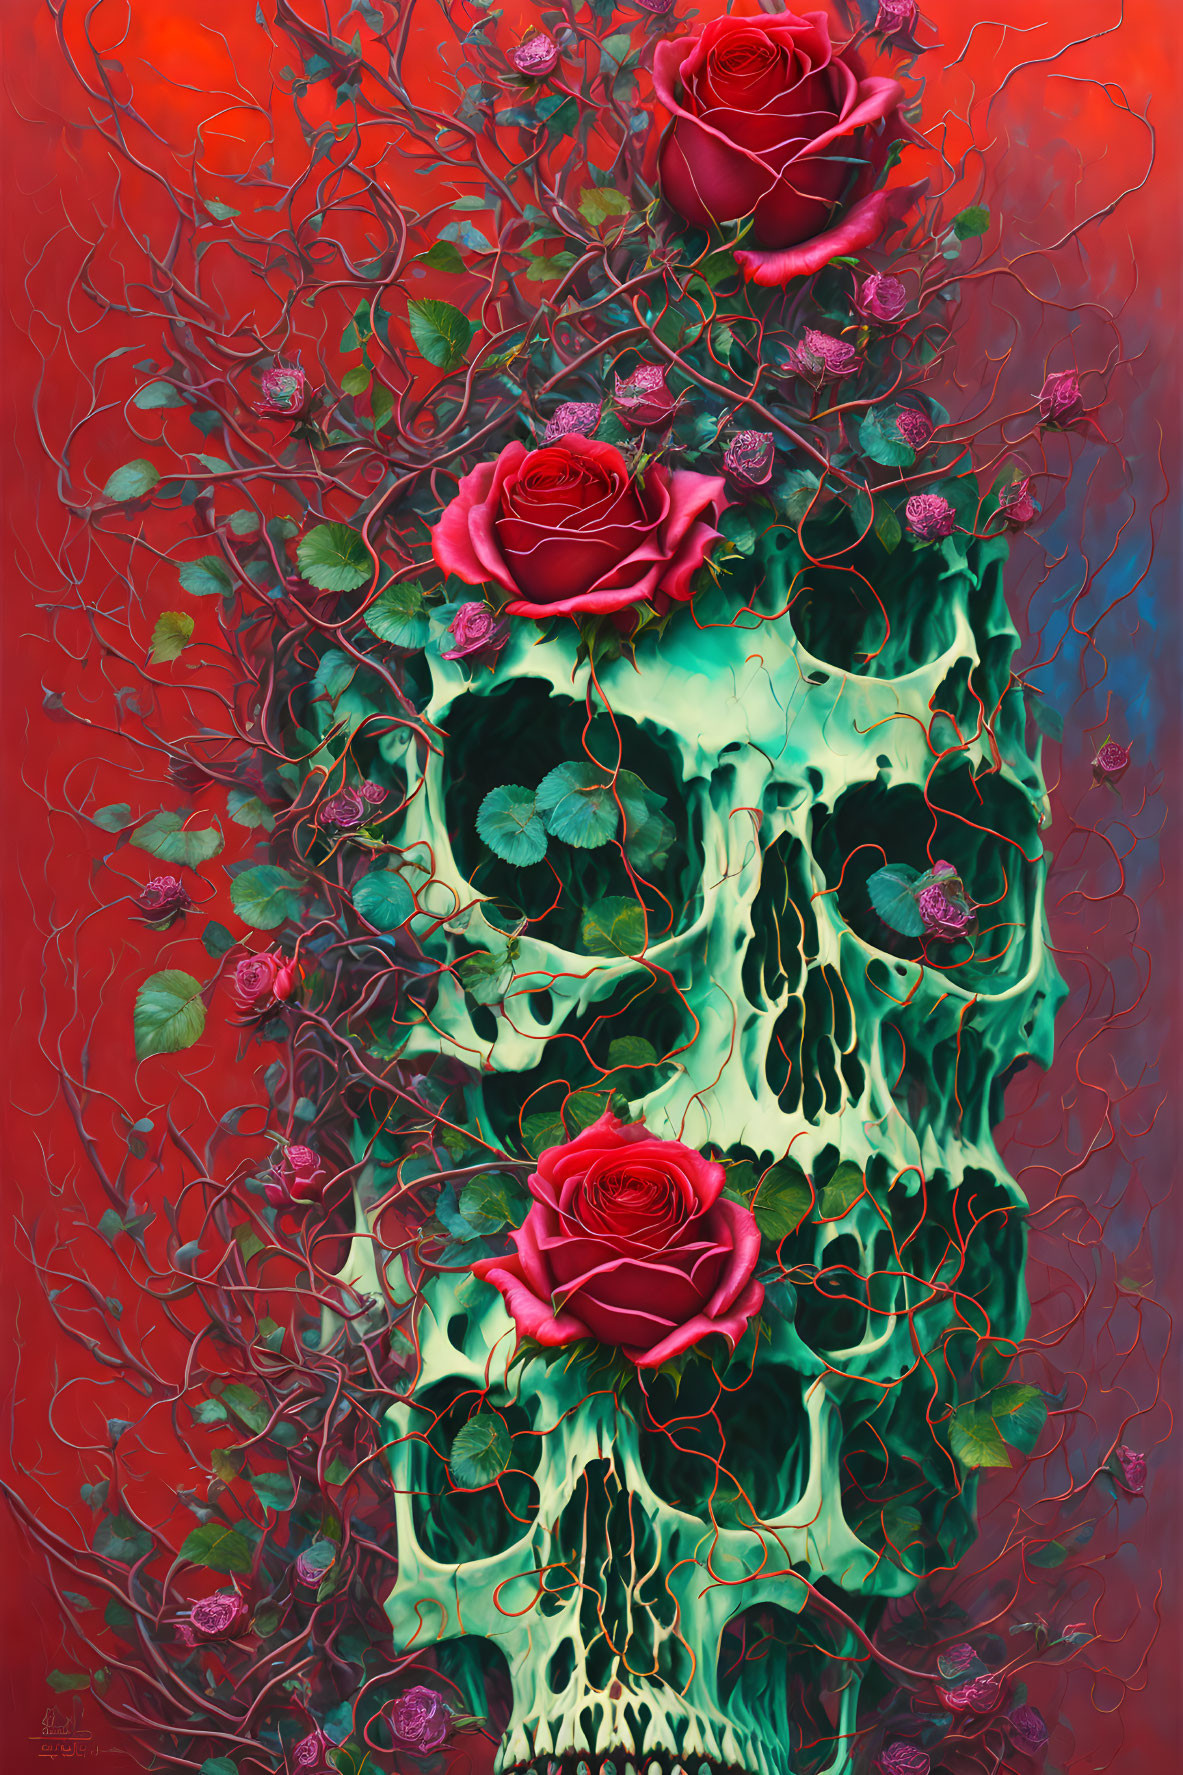 Skull with roses and vines on red background symbolizing life and decay